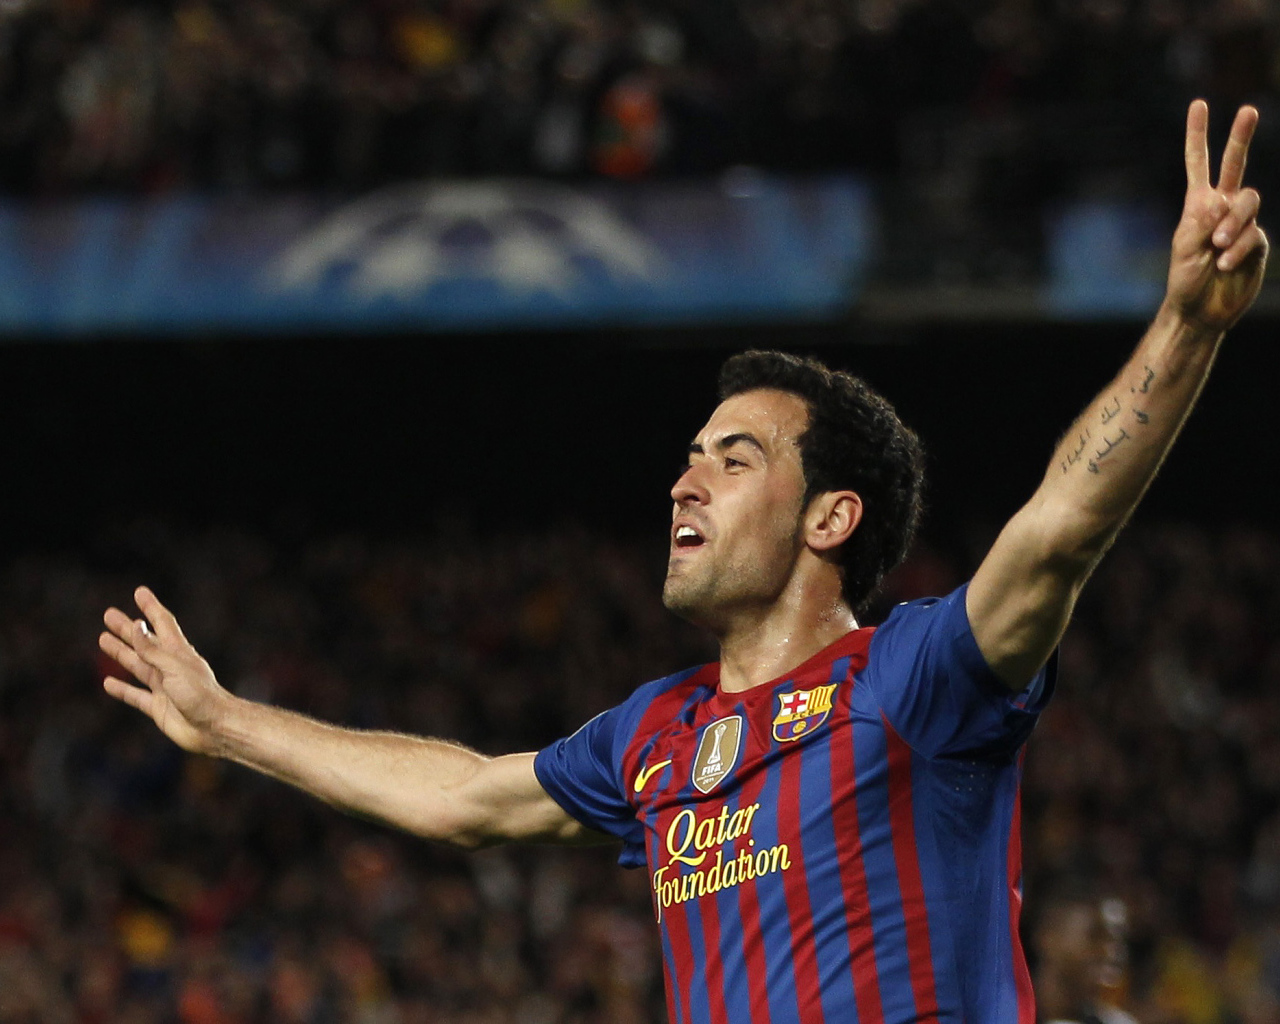 The halfback of Barcelona Sergio Busquets won the game